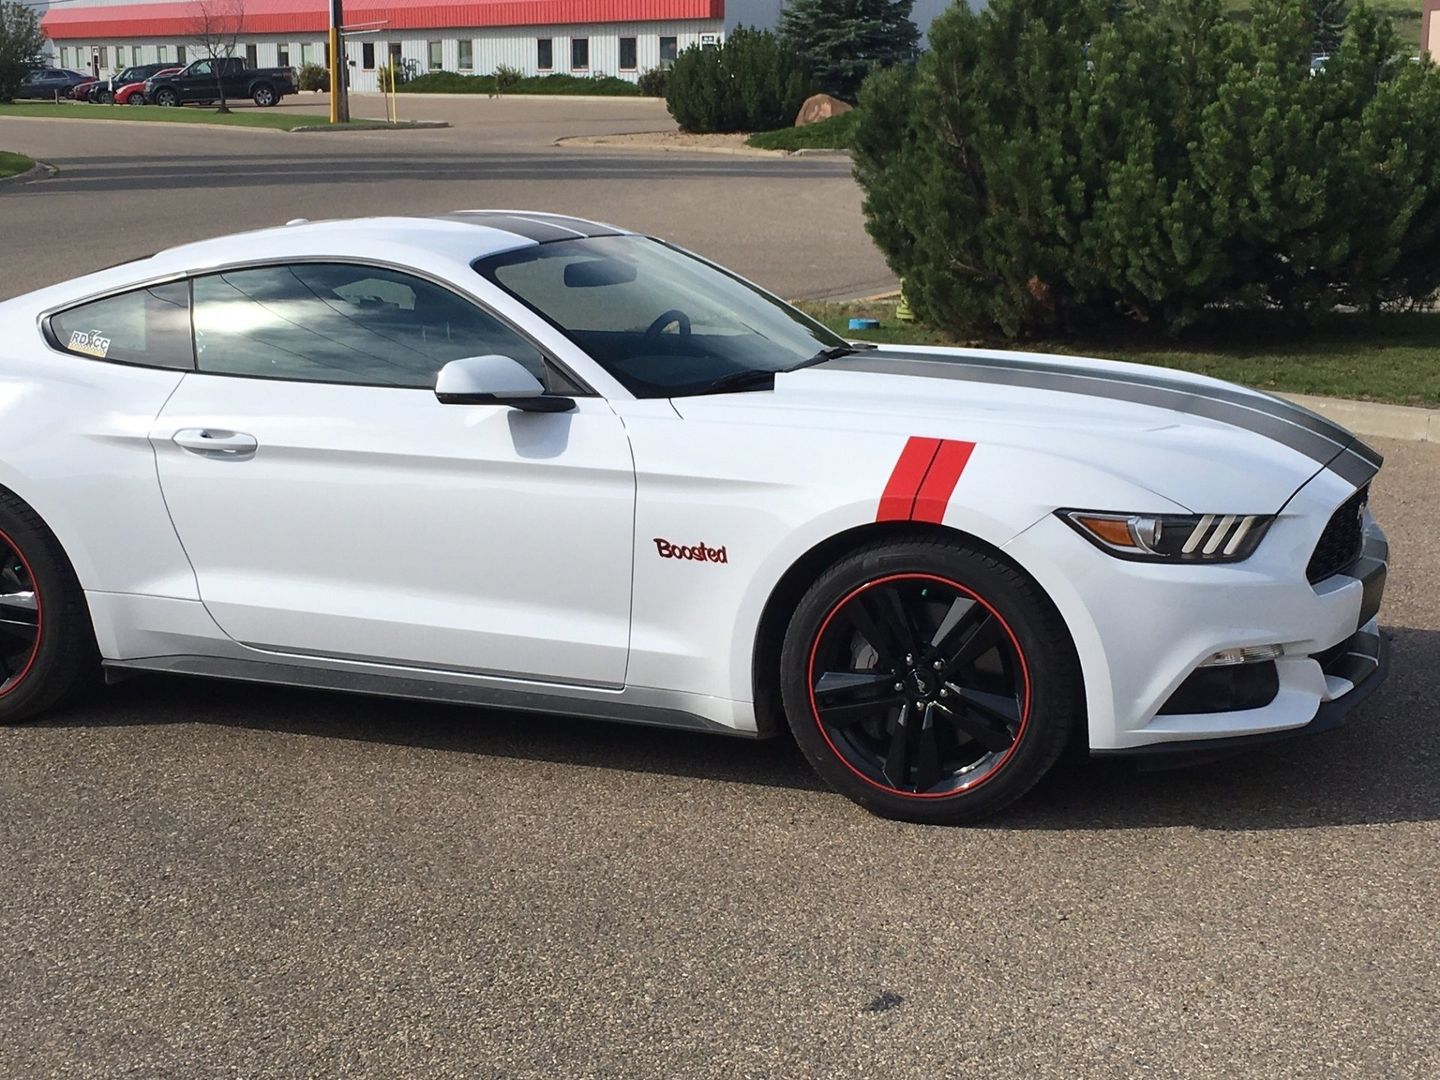 white mustang muscle car with red decorative decals on it